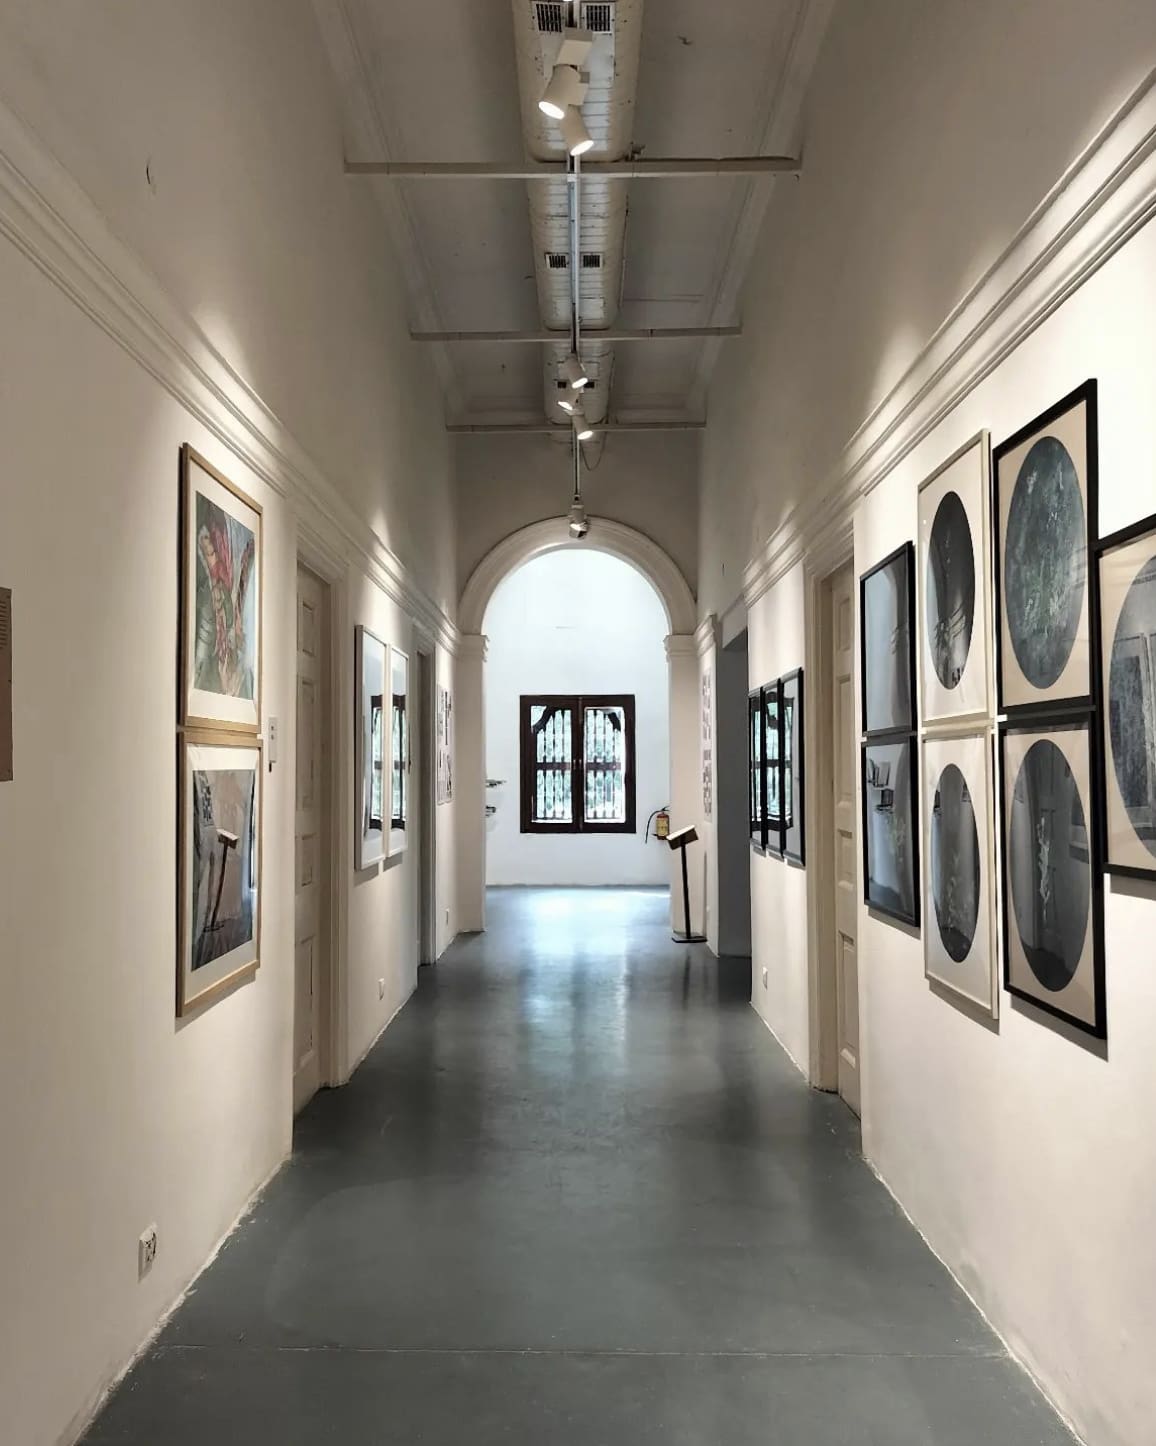 The best things to do in Alibaug | art hangs the corridor walls in a gallery space